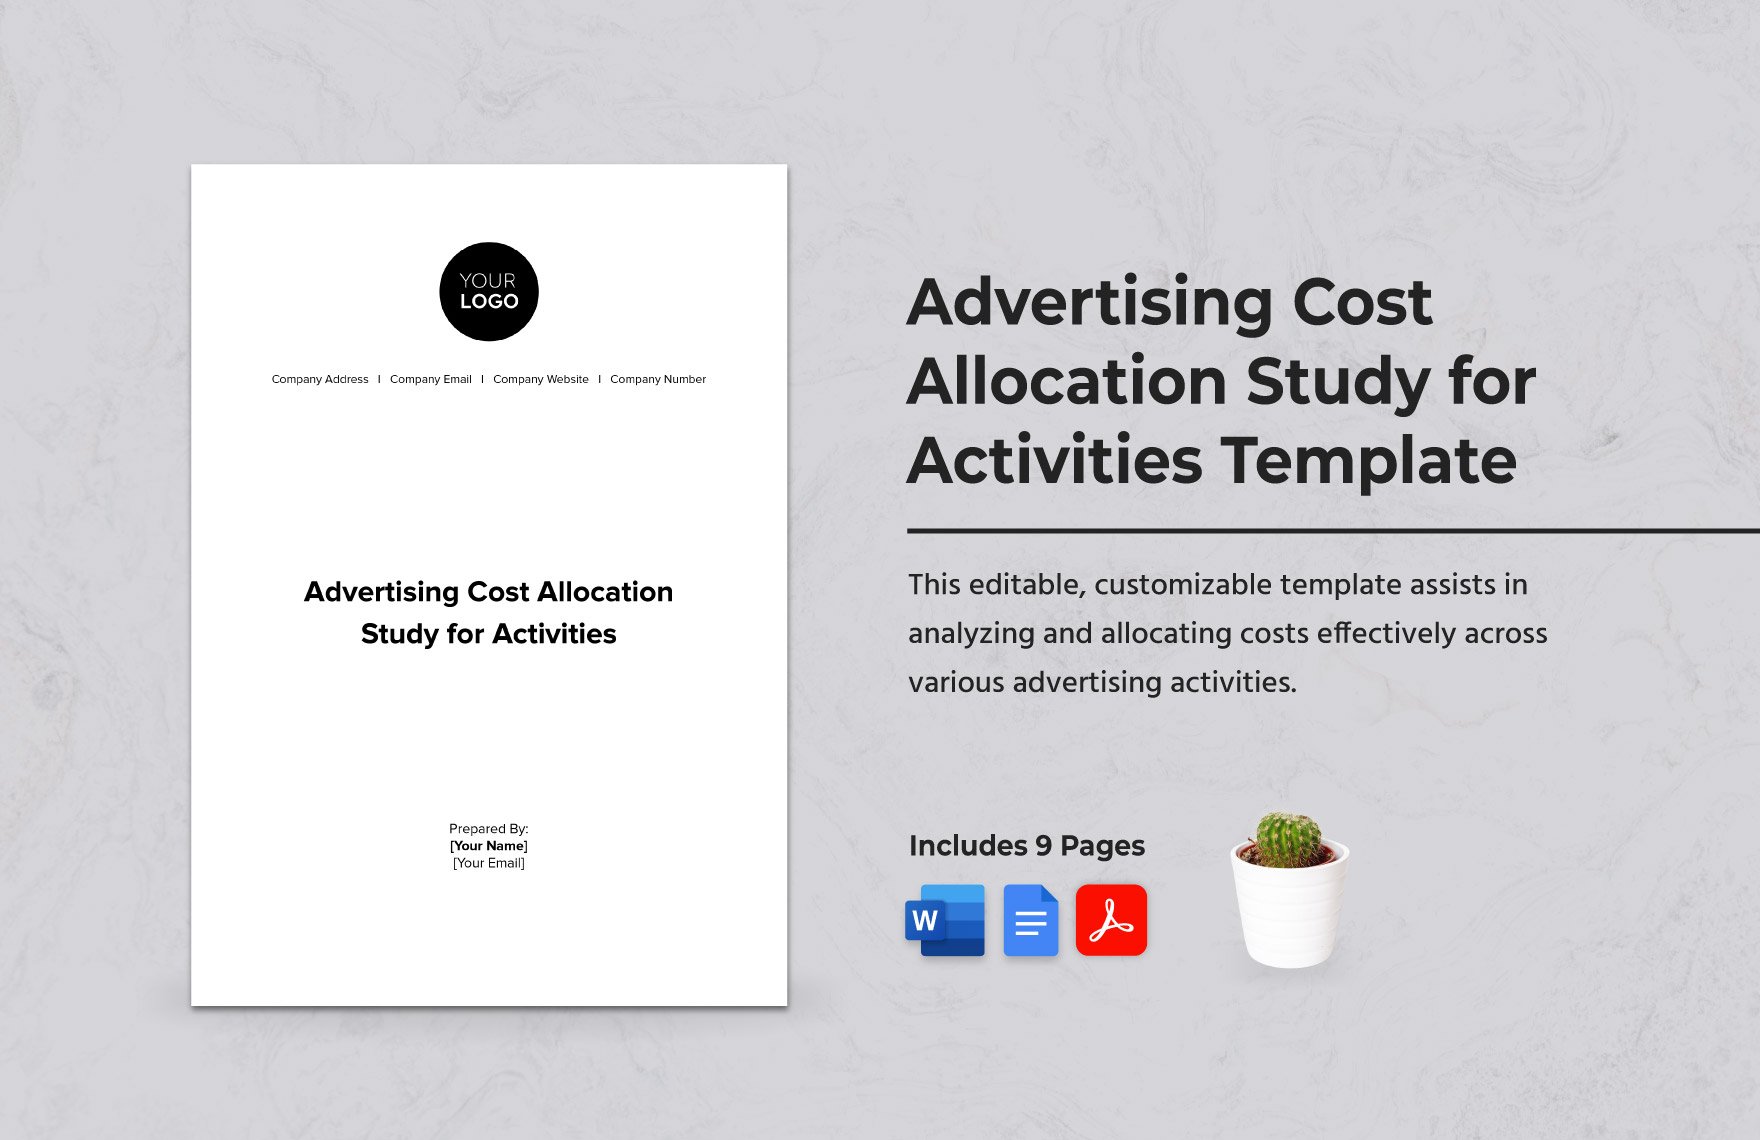 Advertising Cost Allocation Study for Activities Template